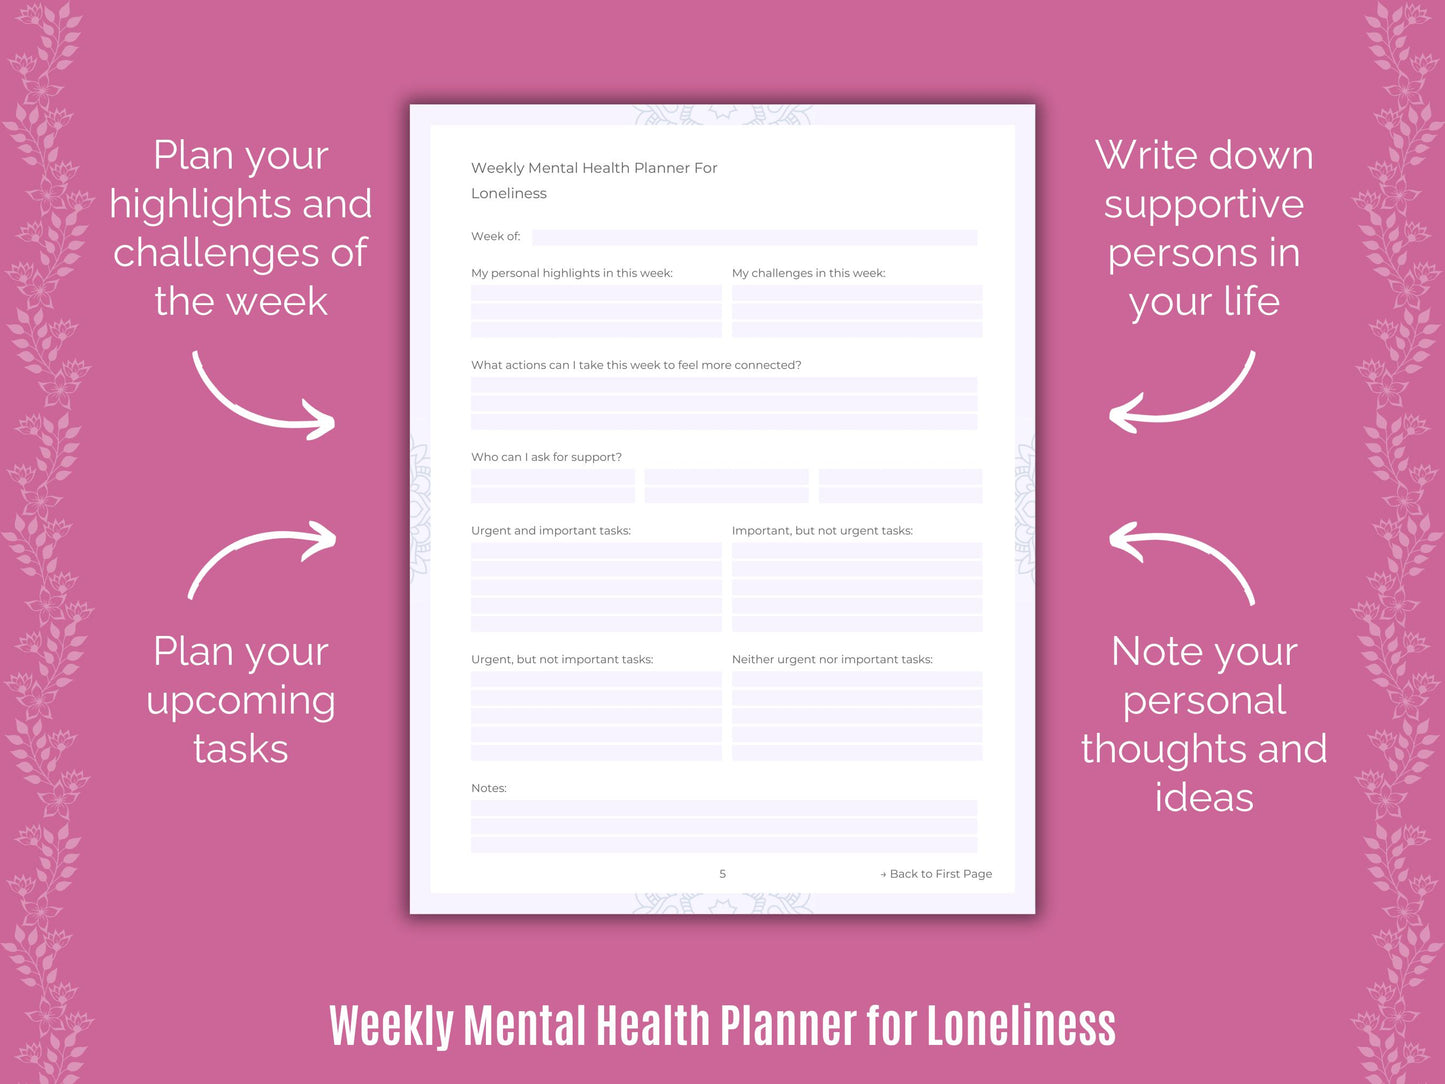 Loneliness Resources, Goal Setting, Loneliness Mental Health, Loneliness Journals, Journaling, Loneliness Workbooks, Loneliness Planners, Loneliness Templates, Loneliness Therapy, Loneliness Tools, Loneliness Notes, Cheat Sheet, Counseling